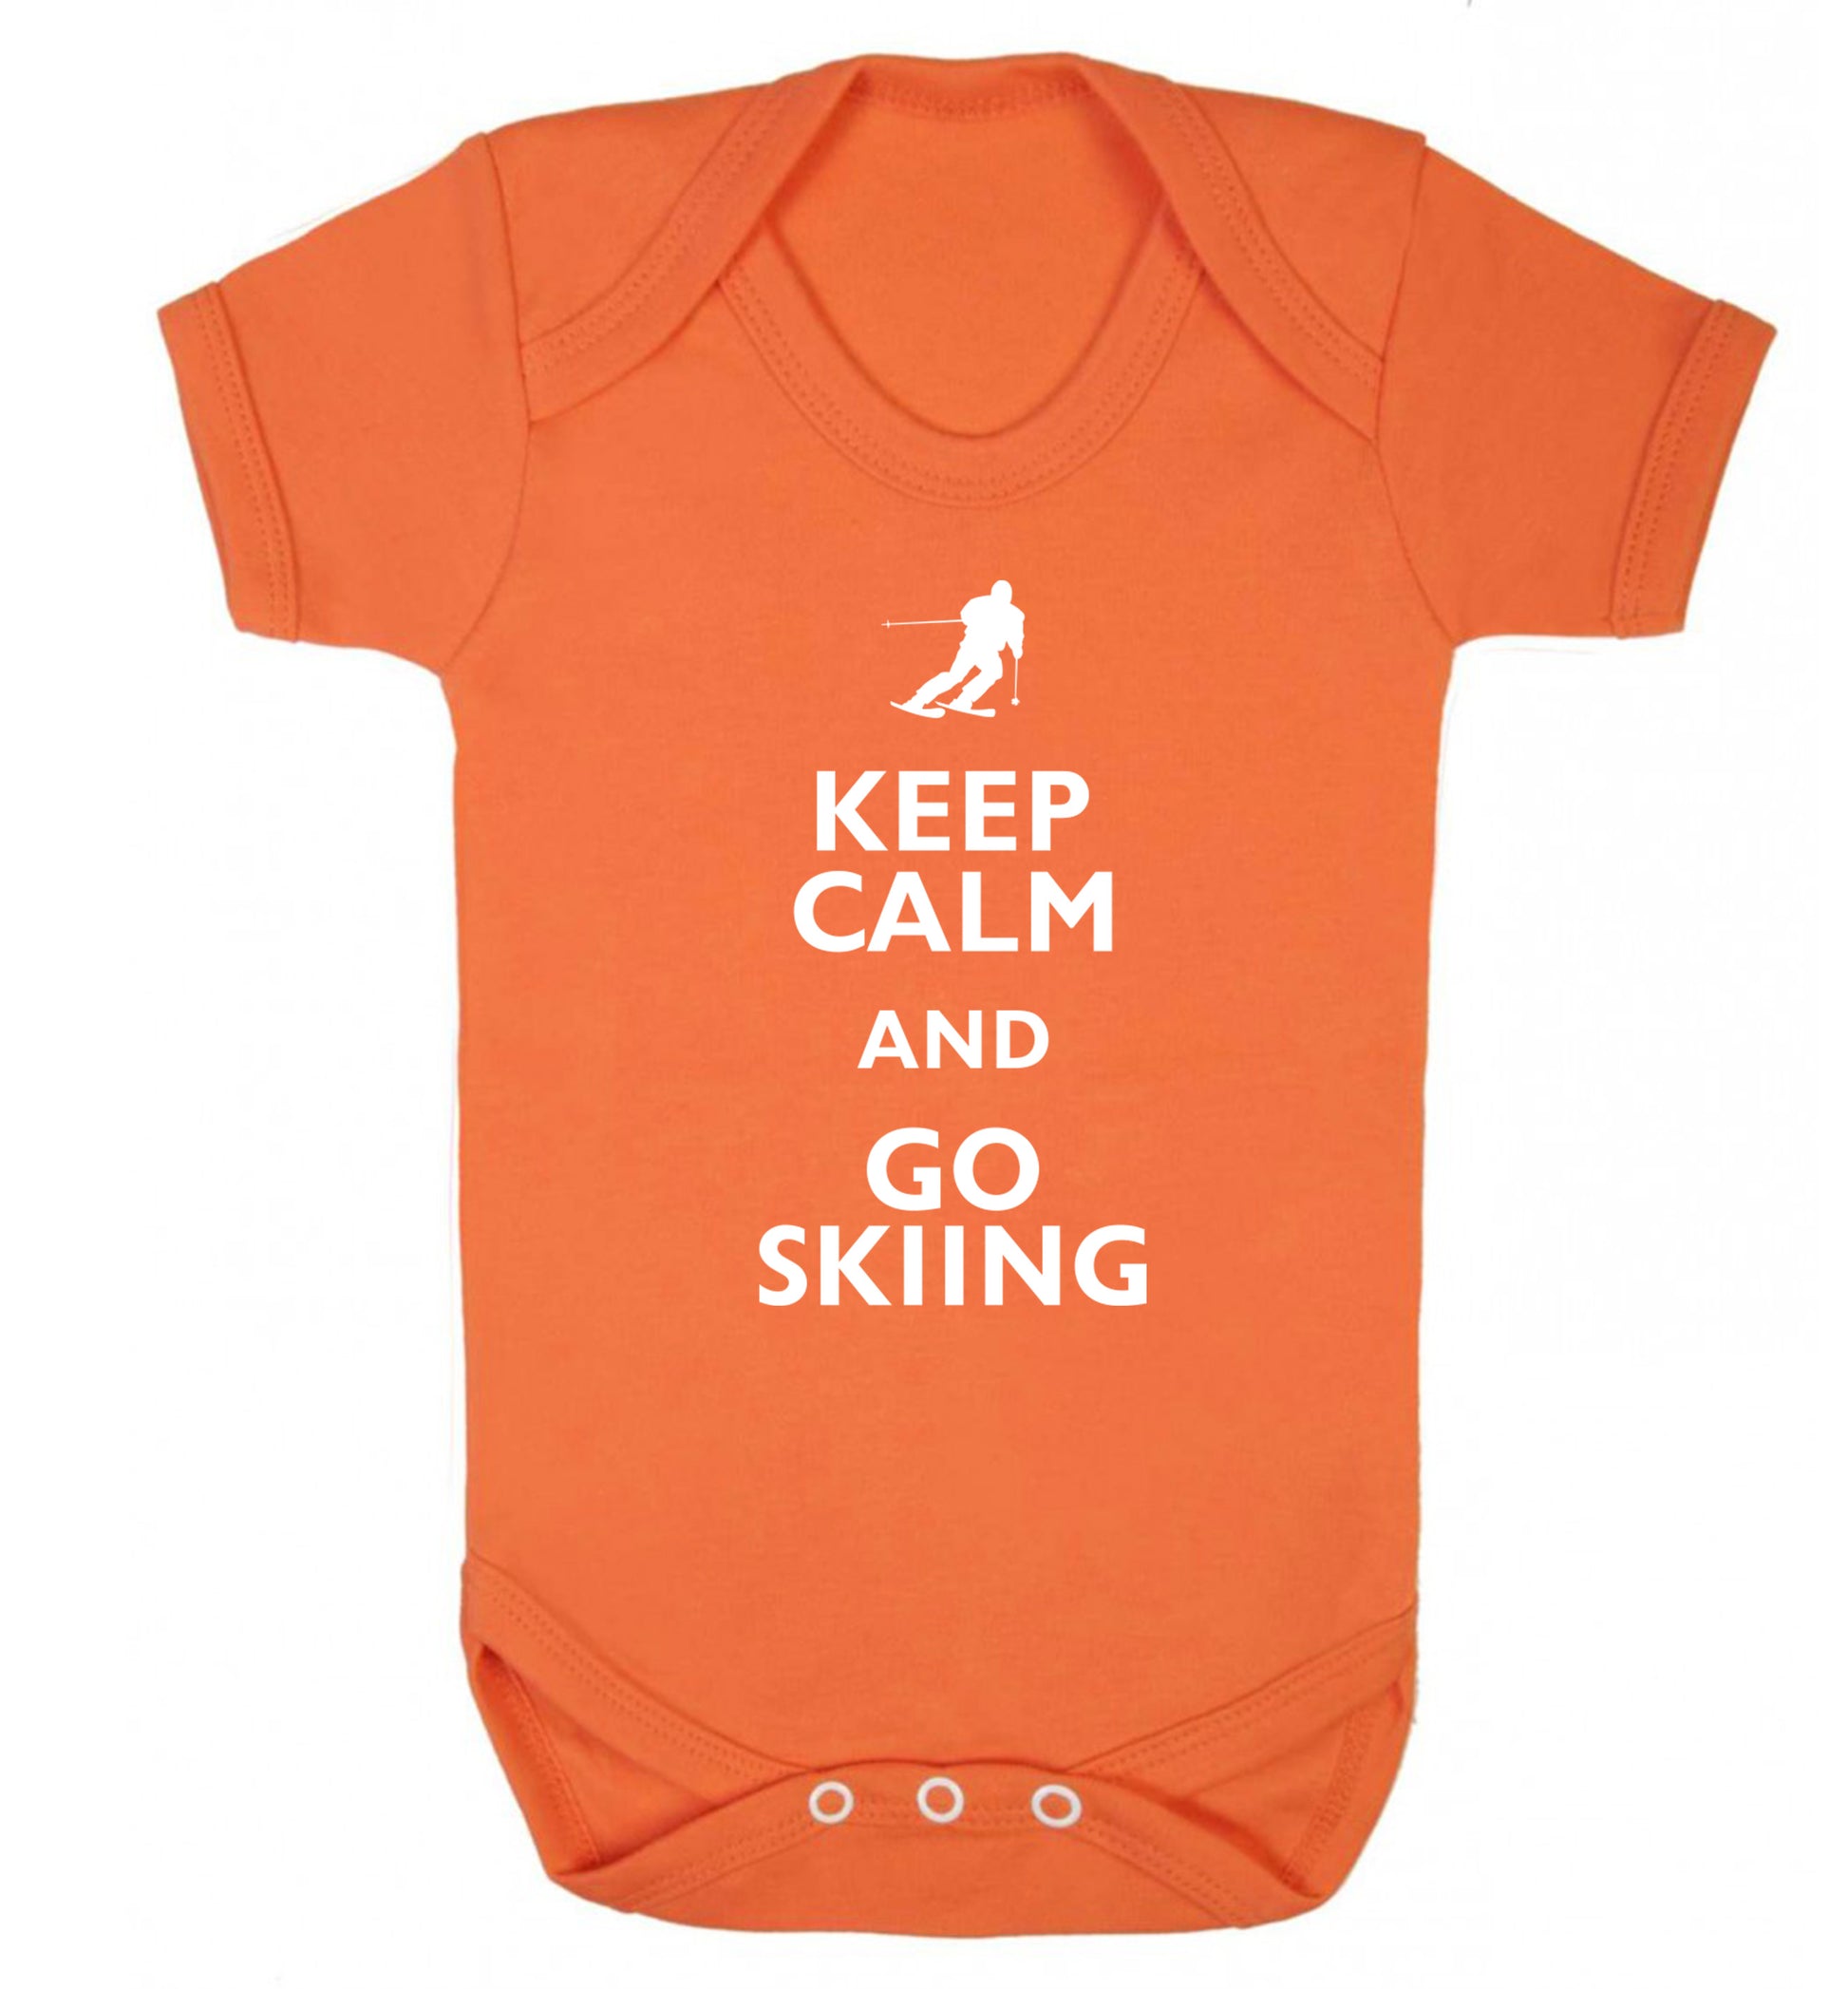 Keep calm and go skiing Baby Vest orange 18-24 months